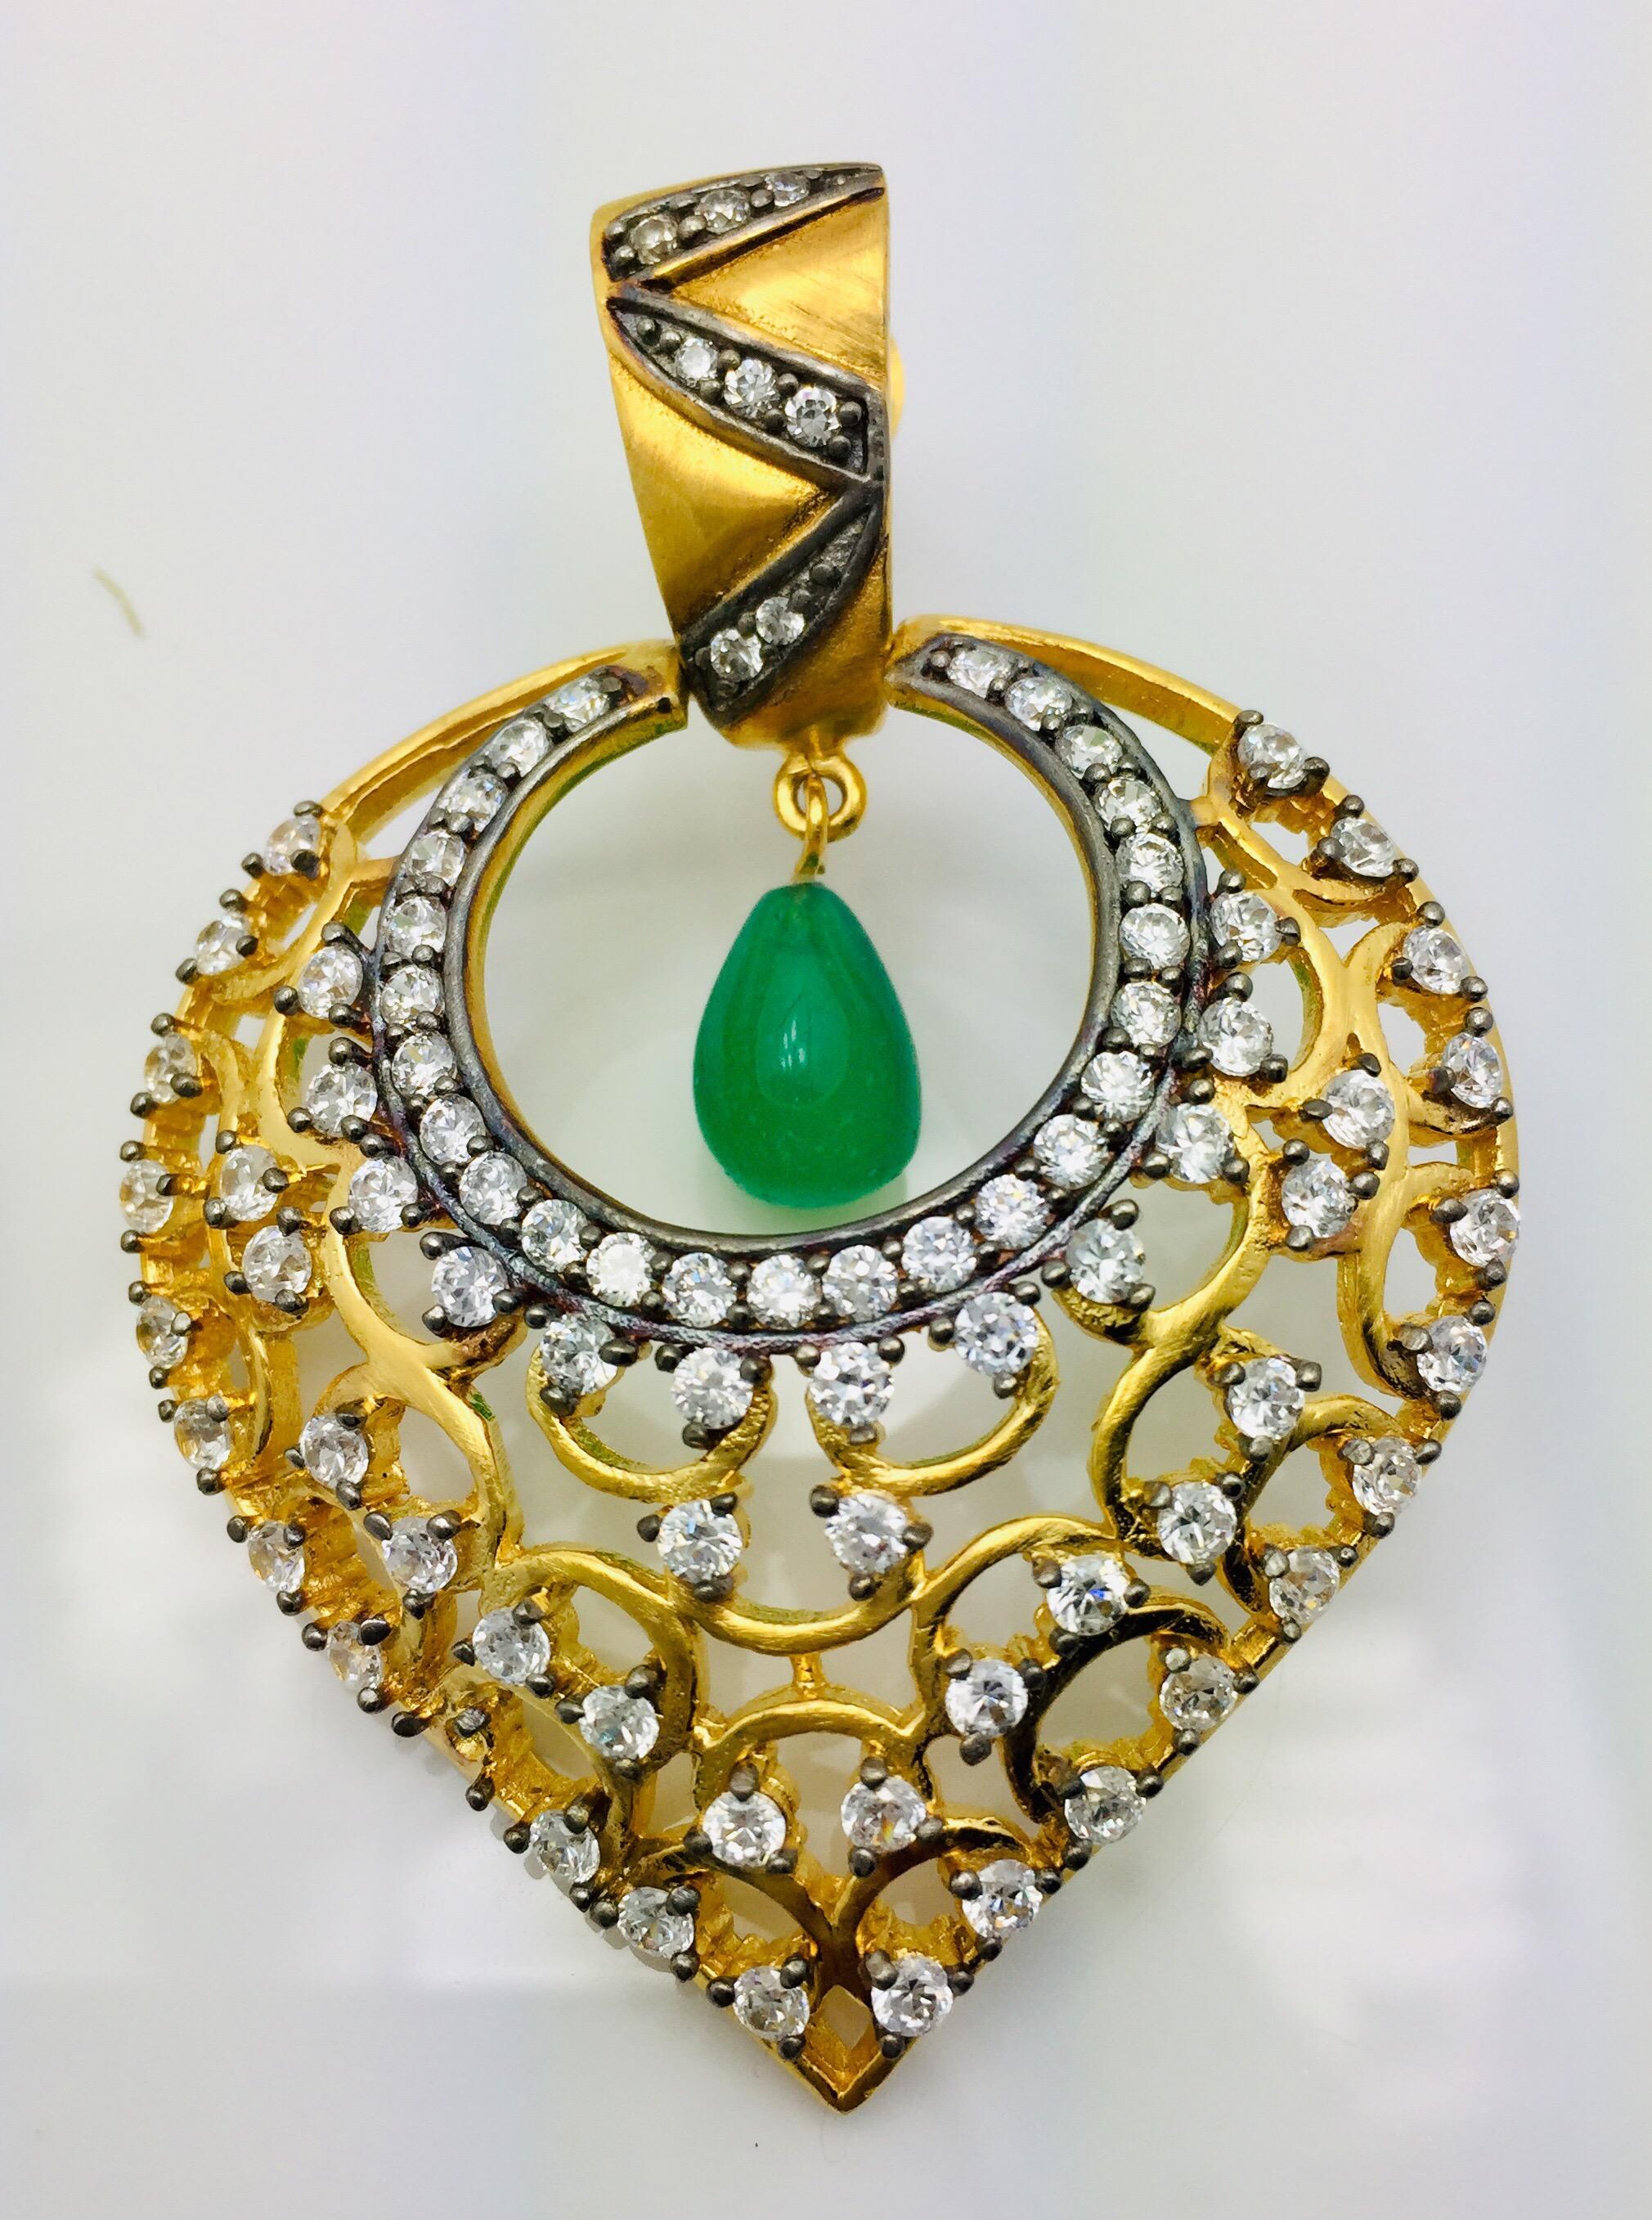 Gold Leaf enhanced by dozens of twinkling CZ stones and faux emerald drop earrings. These earrings hit all the trends in an elegantly beautiful way. Earrings have a post closure for pierced ears. 

A small video can be requested.

Metal: 18k gold